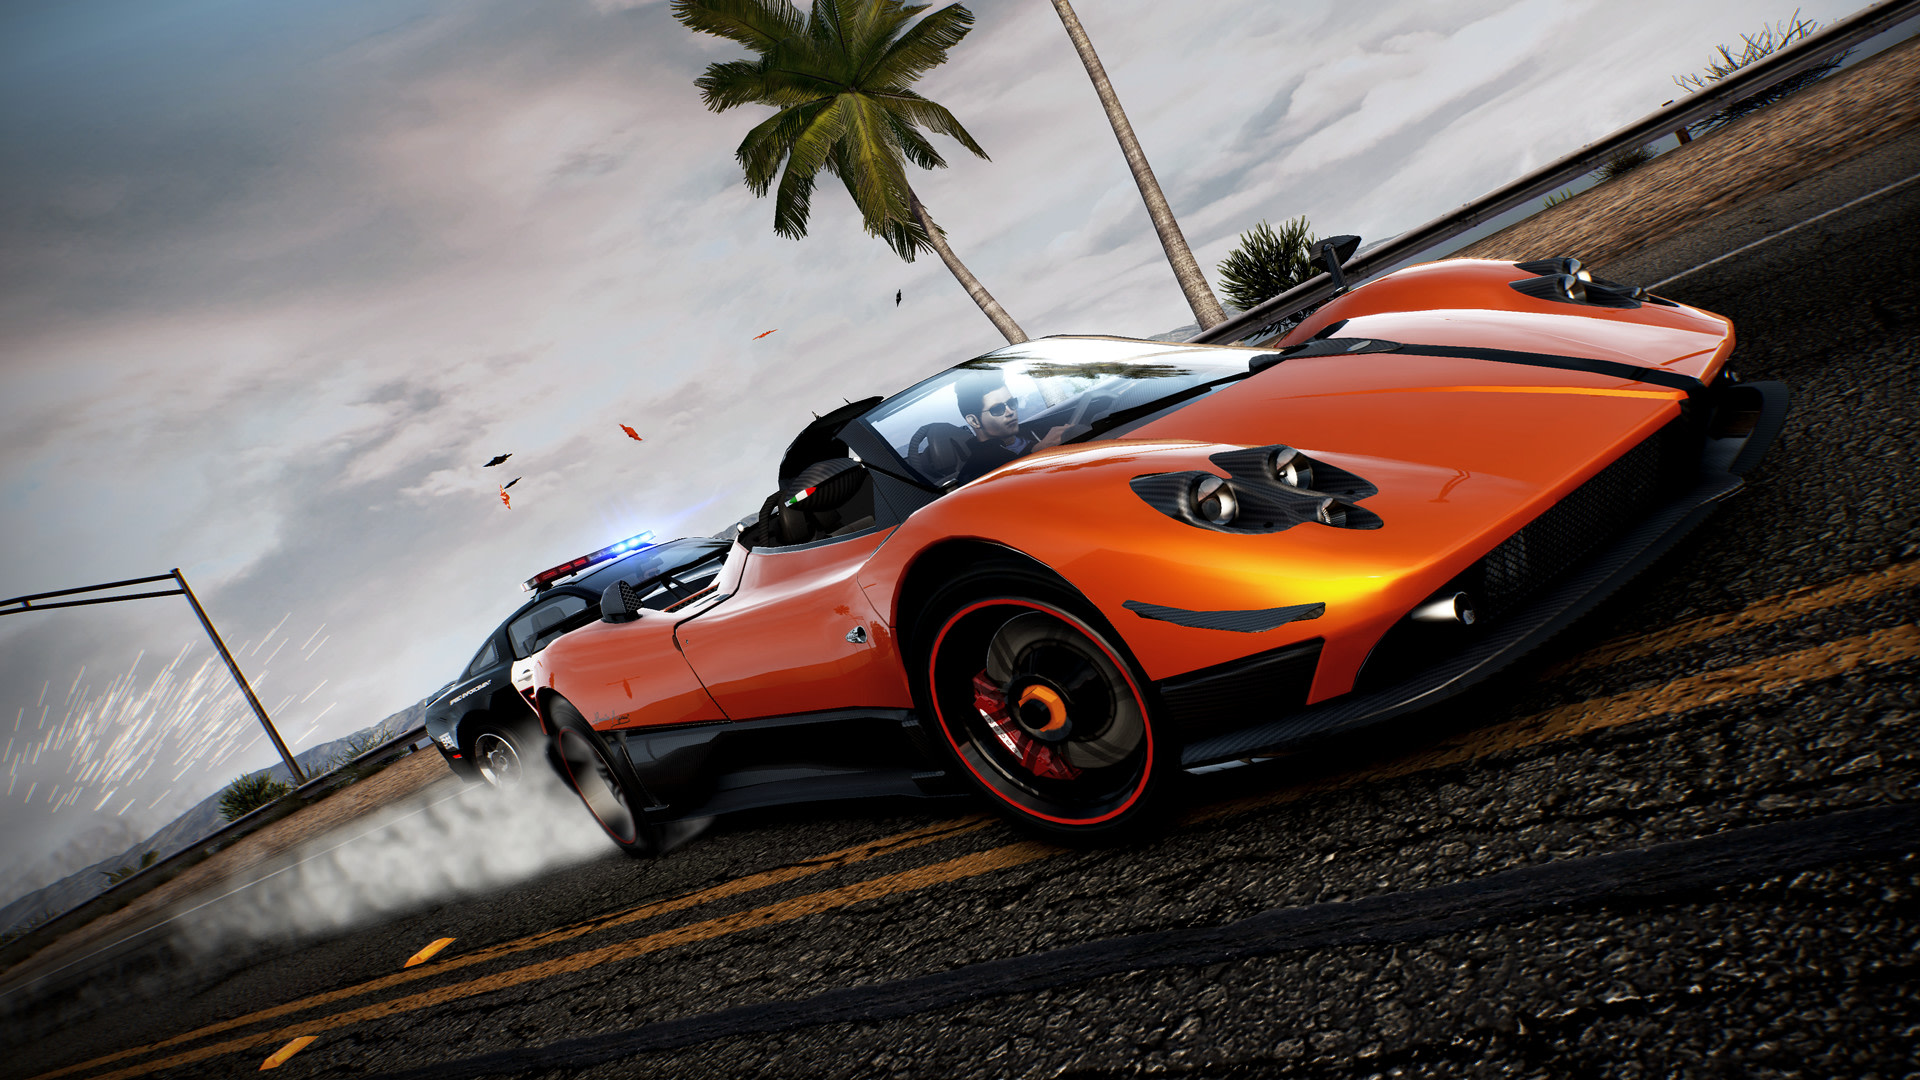 Need For Speed Need For Speed Hot Pursuit Racing Drift Cars Car Video Games PC Gaming Vehicle 1920x1080